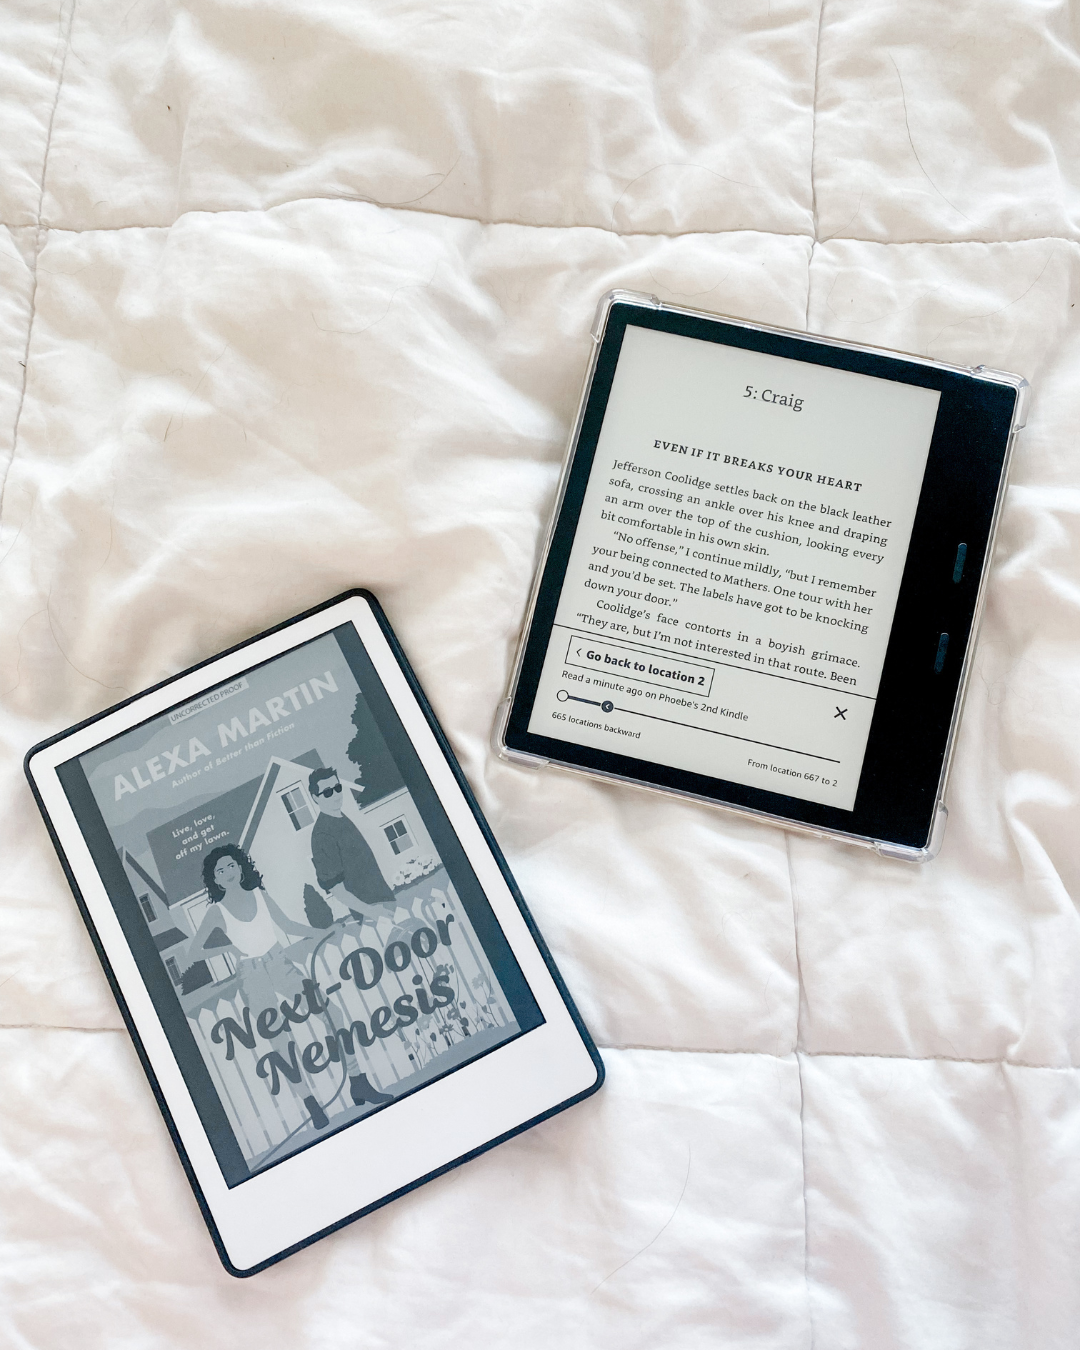 Review: The 2021 Kindle Paperwhite is even better than the Oasis